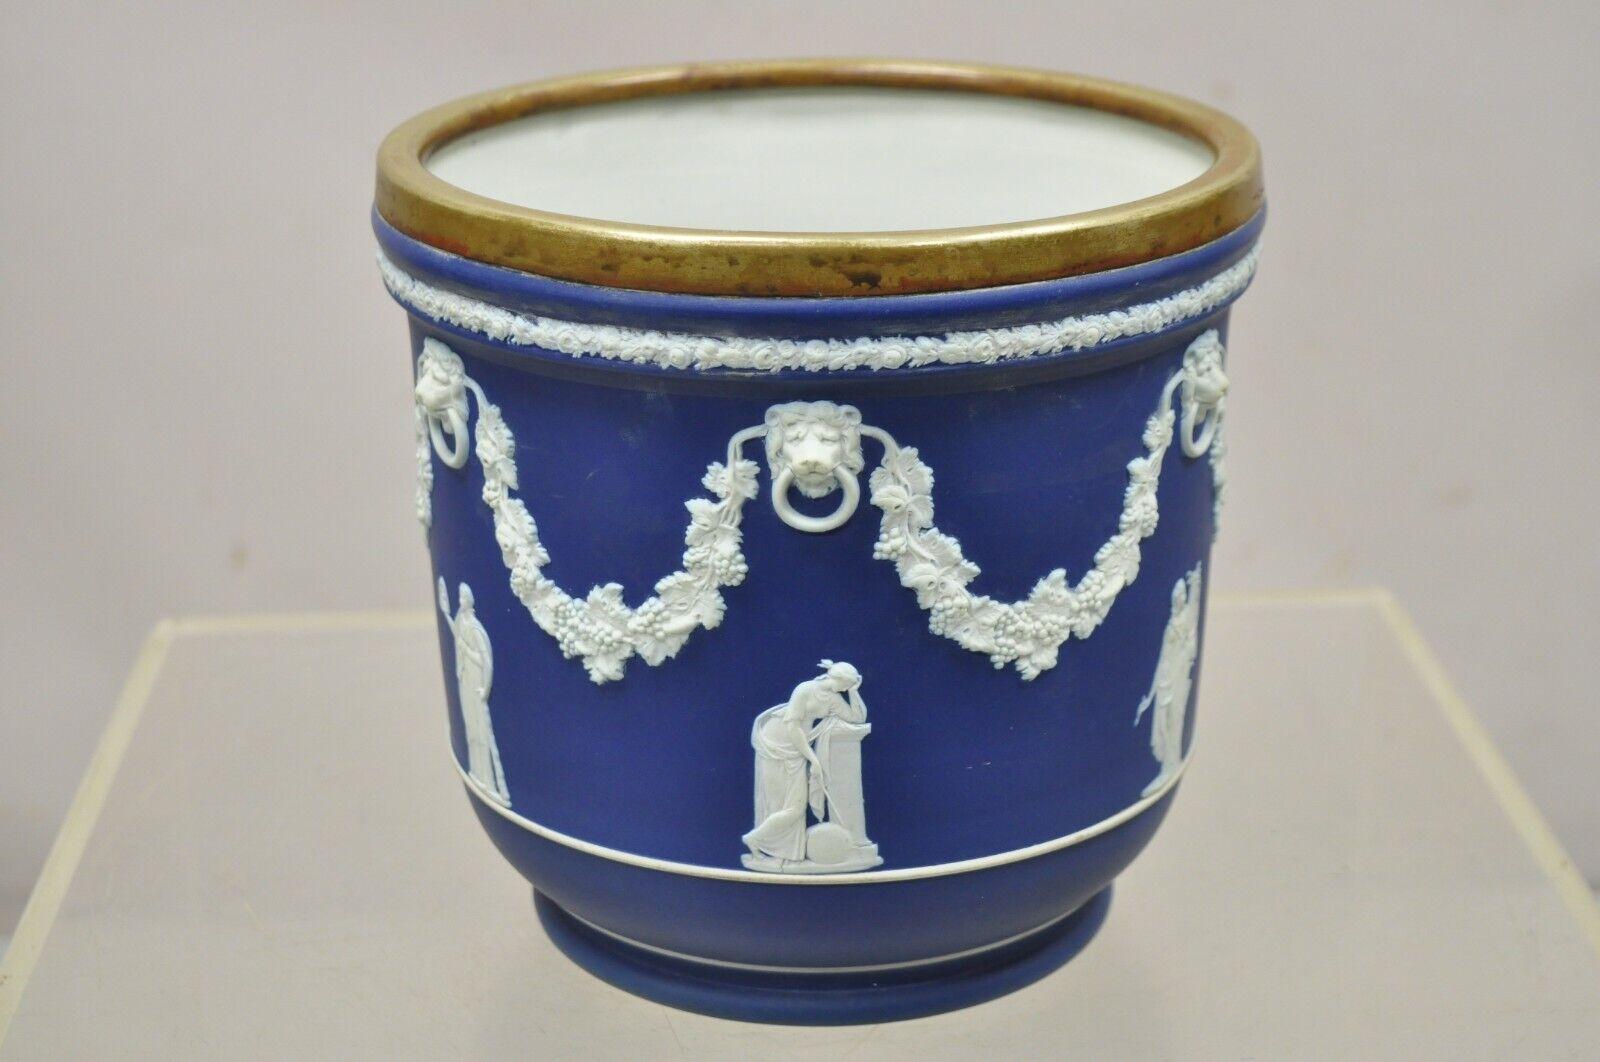 Antique Wedgwood England blue Jasperware cache pot with brass rim. Item features a brass rim with wonderful patina, original stamps to underside, circa late 19th to early 20th century. Measurements: 8